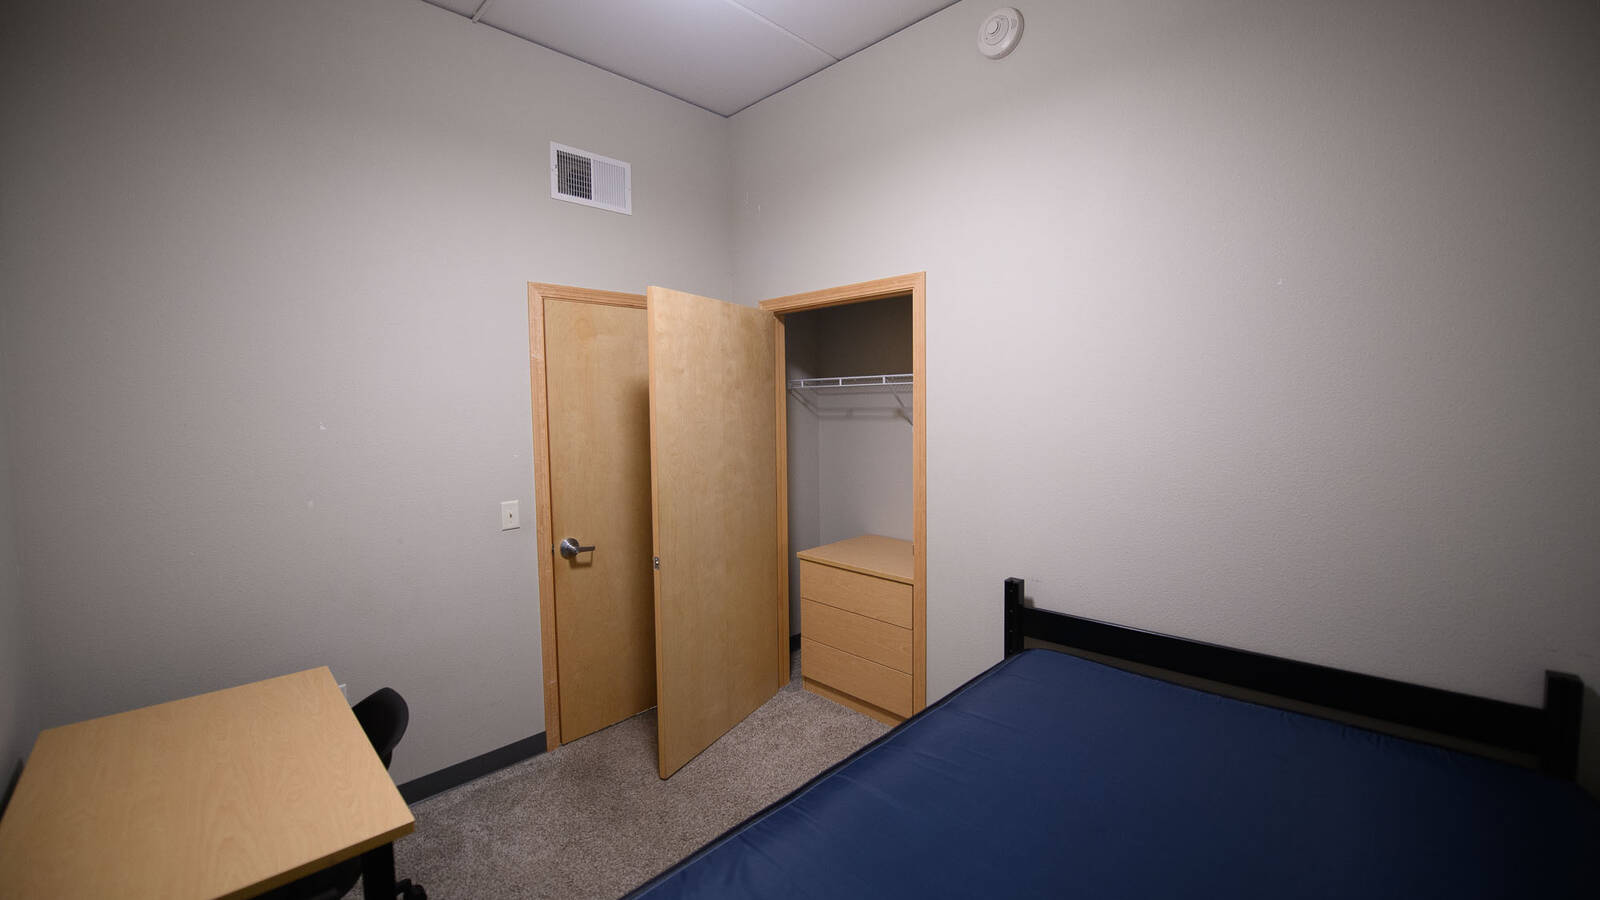 Residence hall bedroom with view of the closet and desk